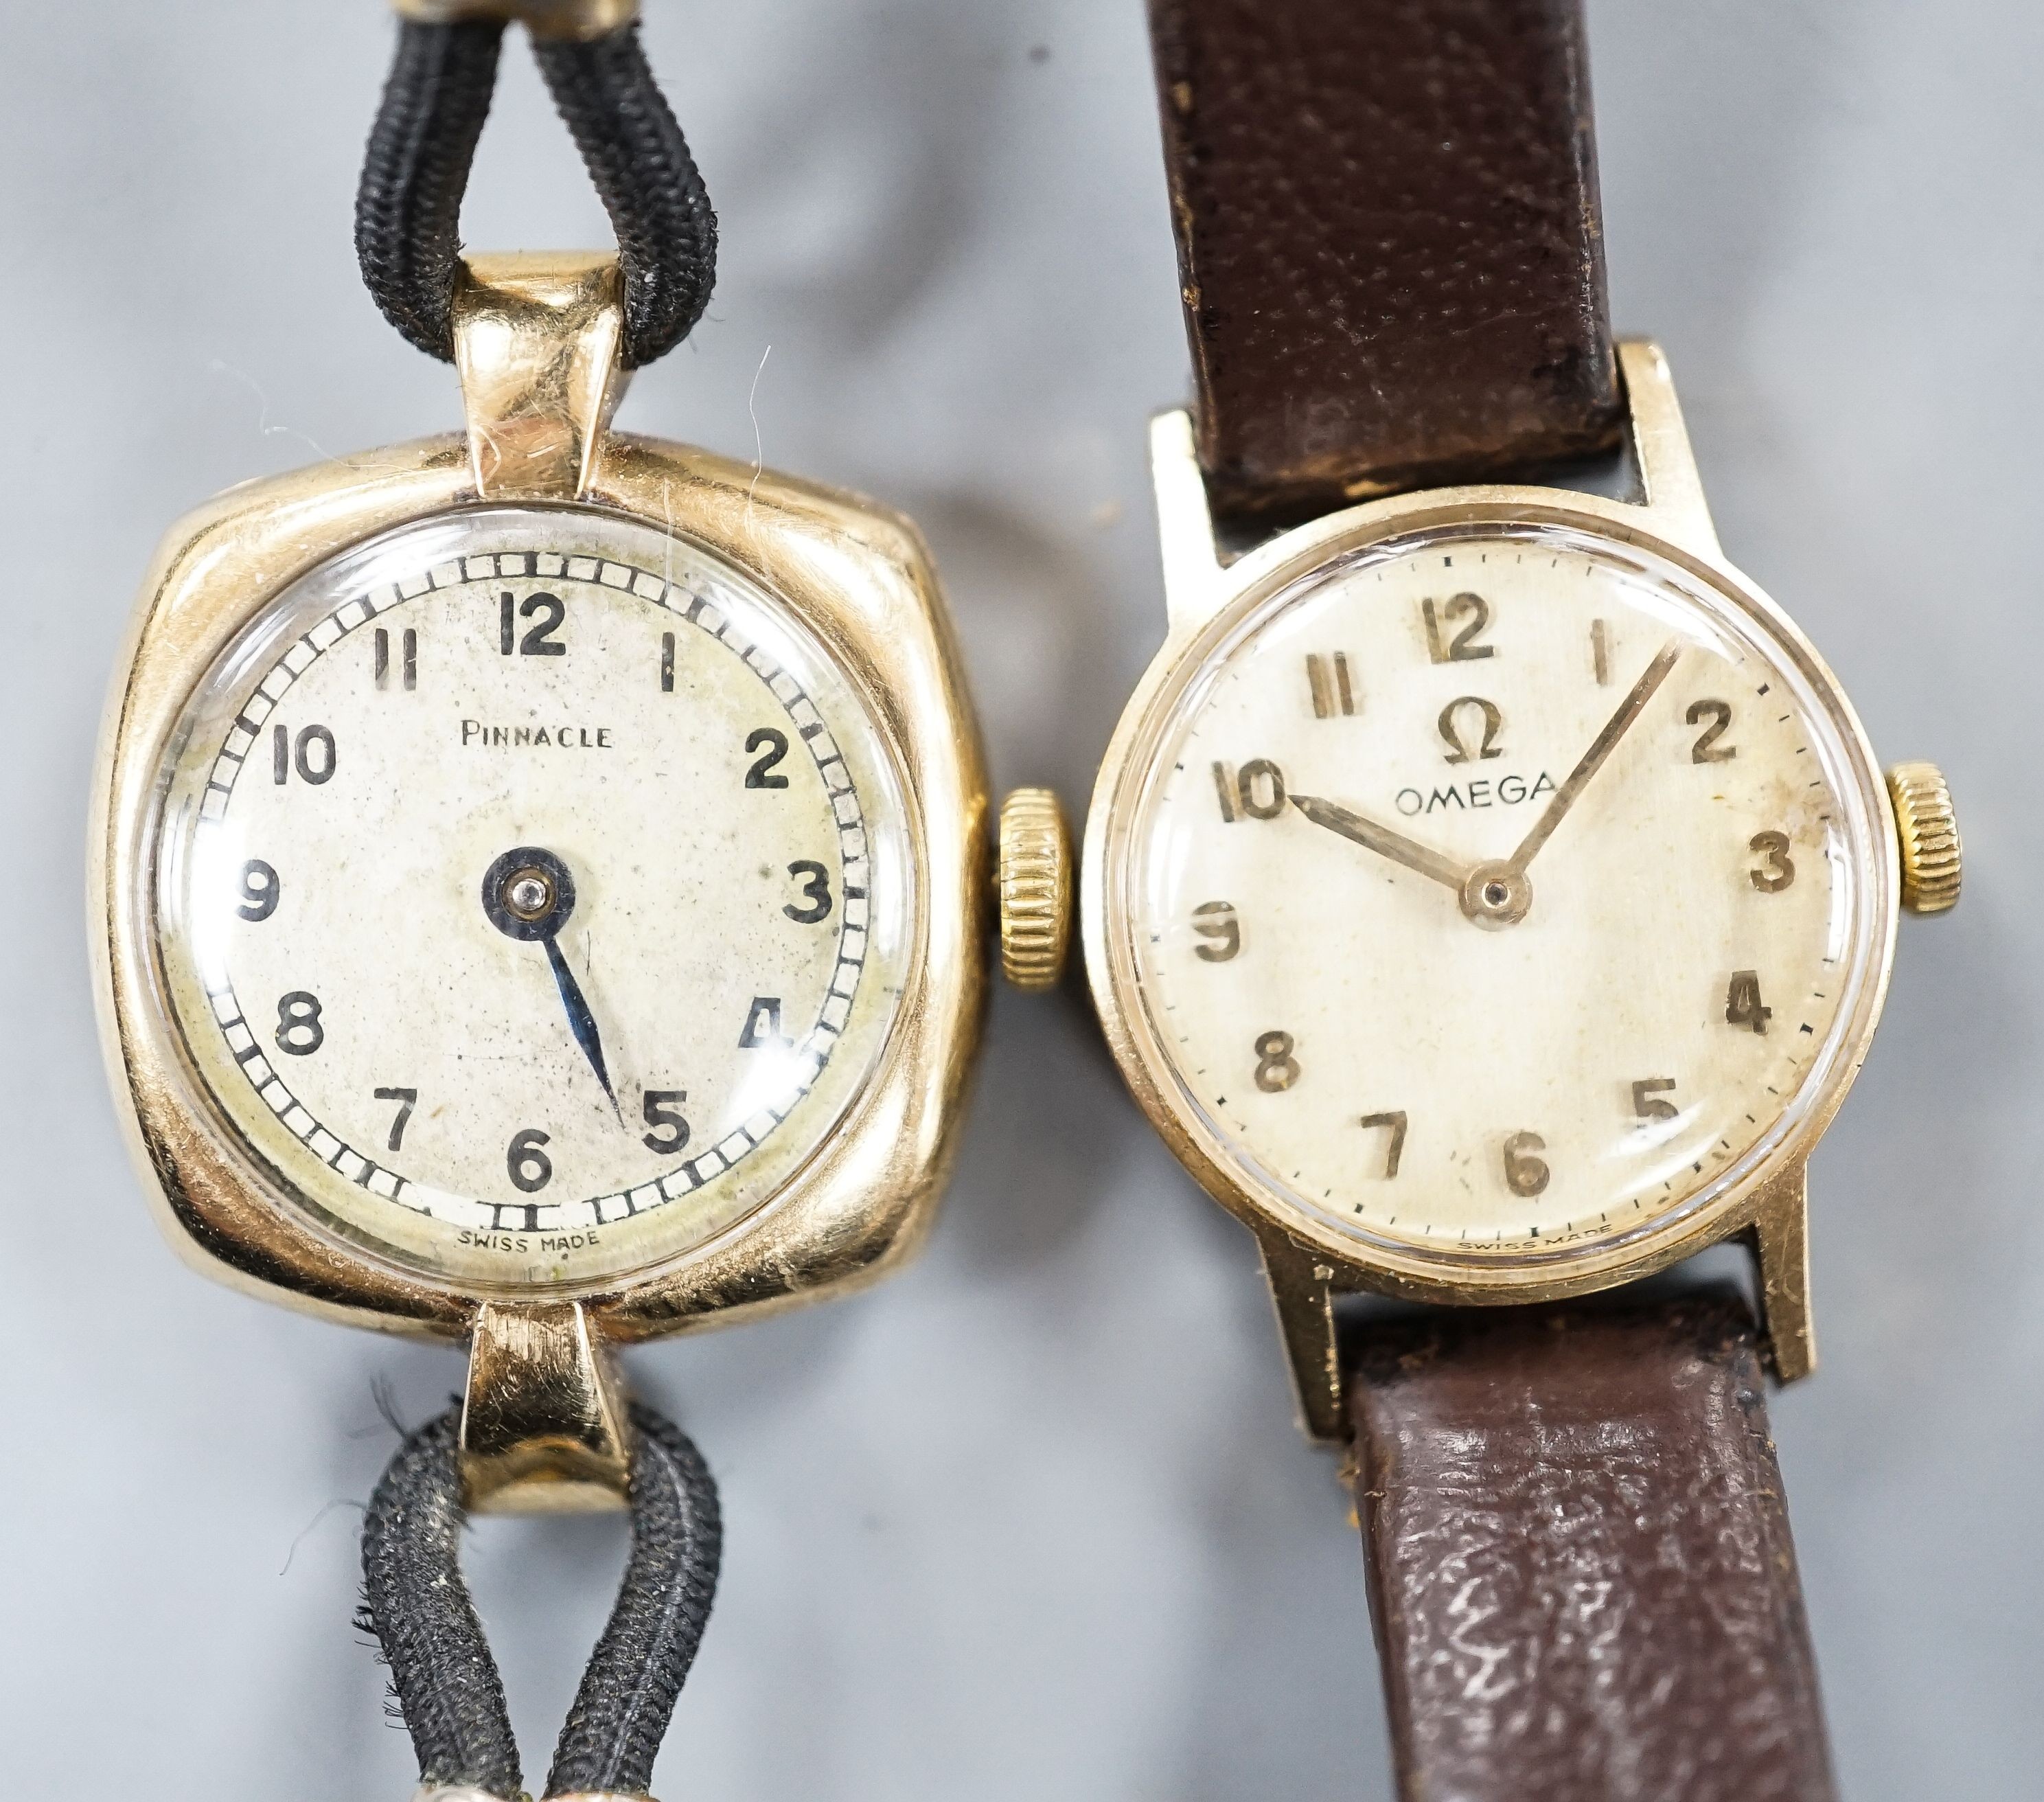 A lady's yellow metal Omega manual wind wrist watch, on leather strap and a similar 9ct Pinnacle watch.